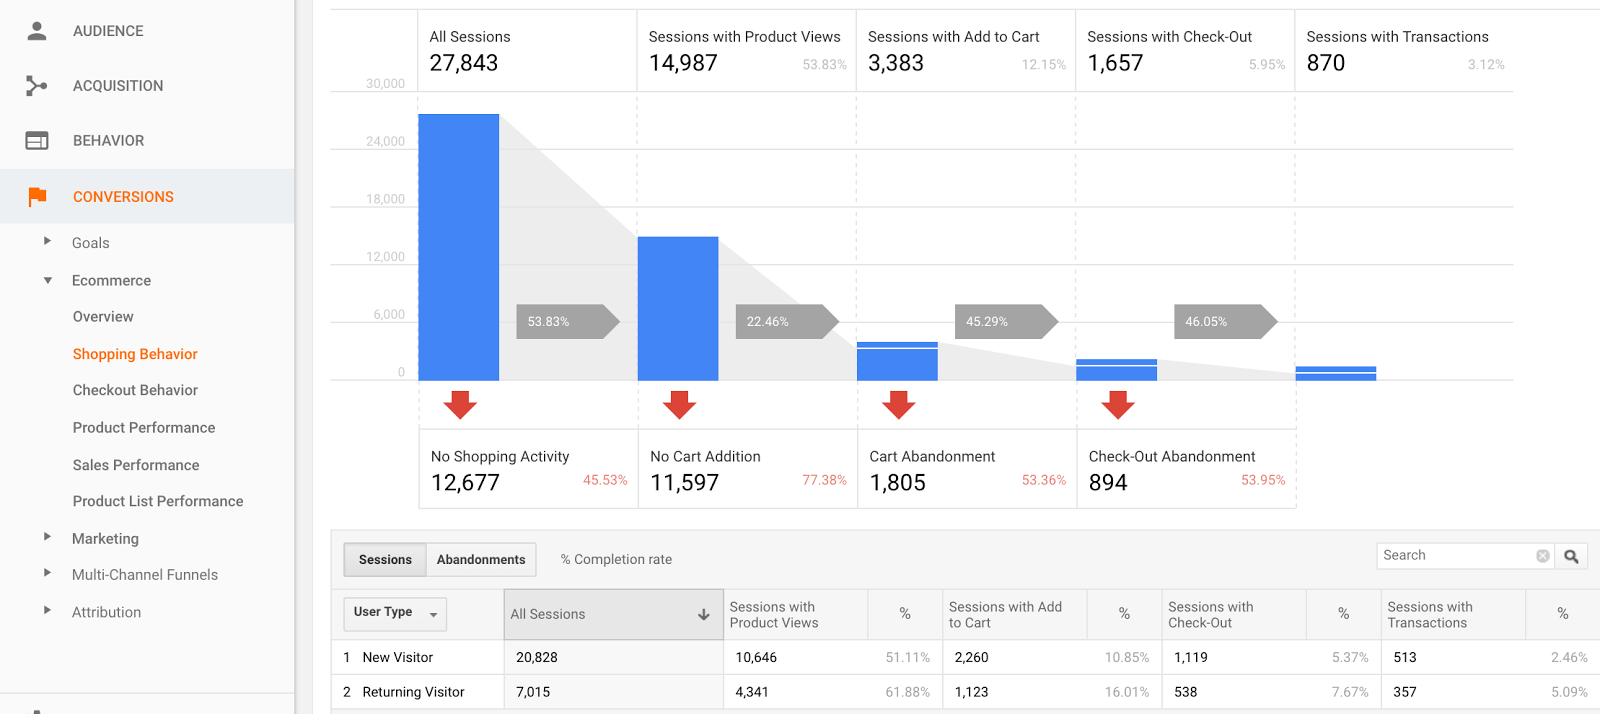 Shopping Cart Abandonment data can be found on Google Analytics by going to Conversions, then Shopping Behavior